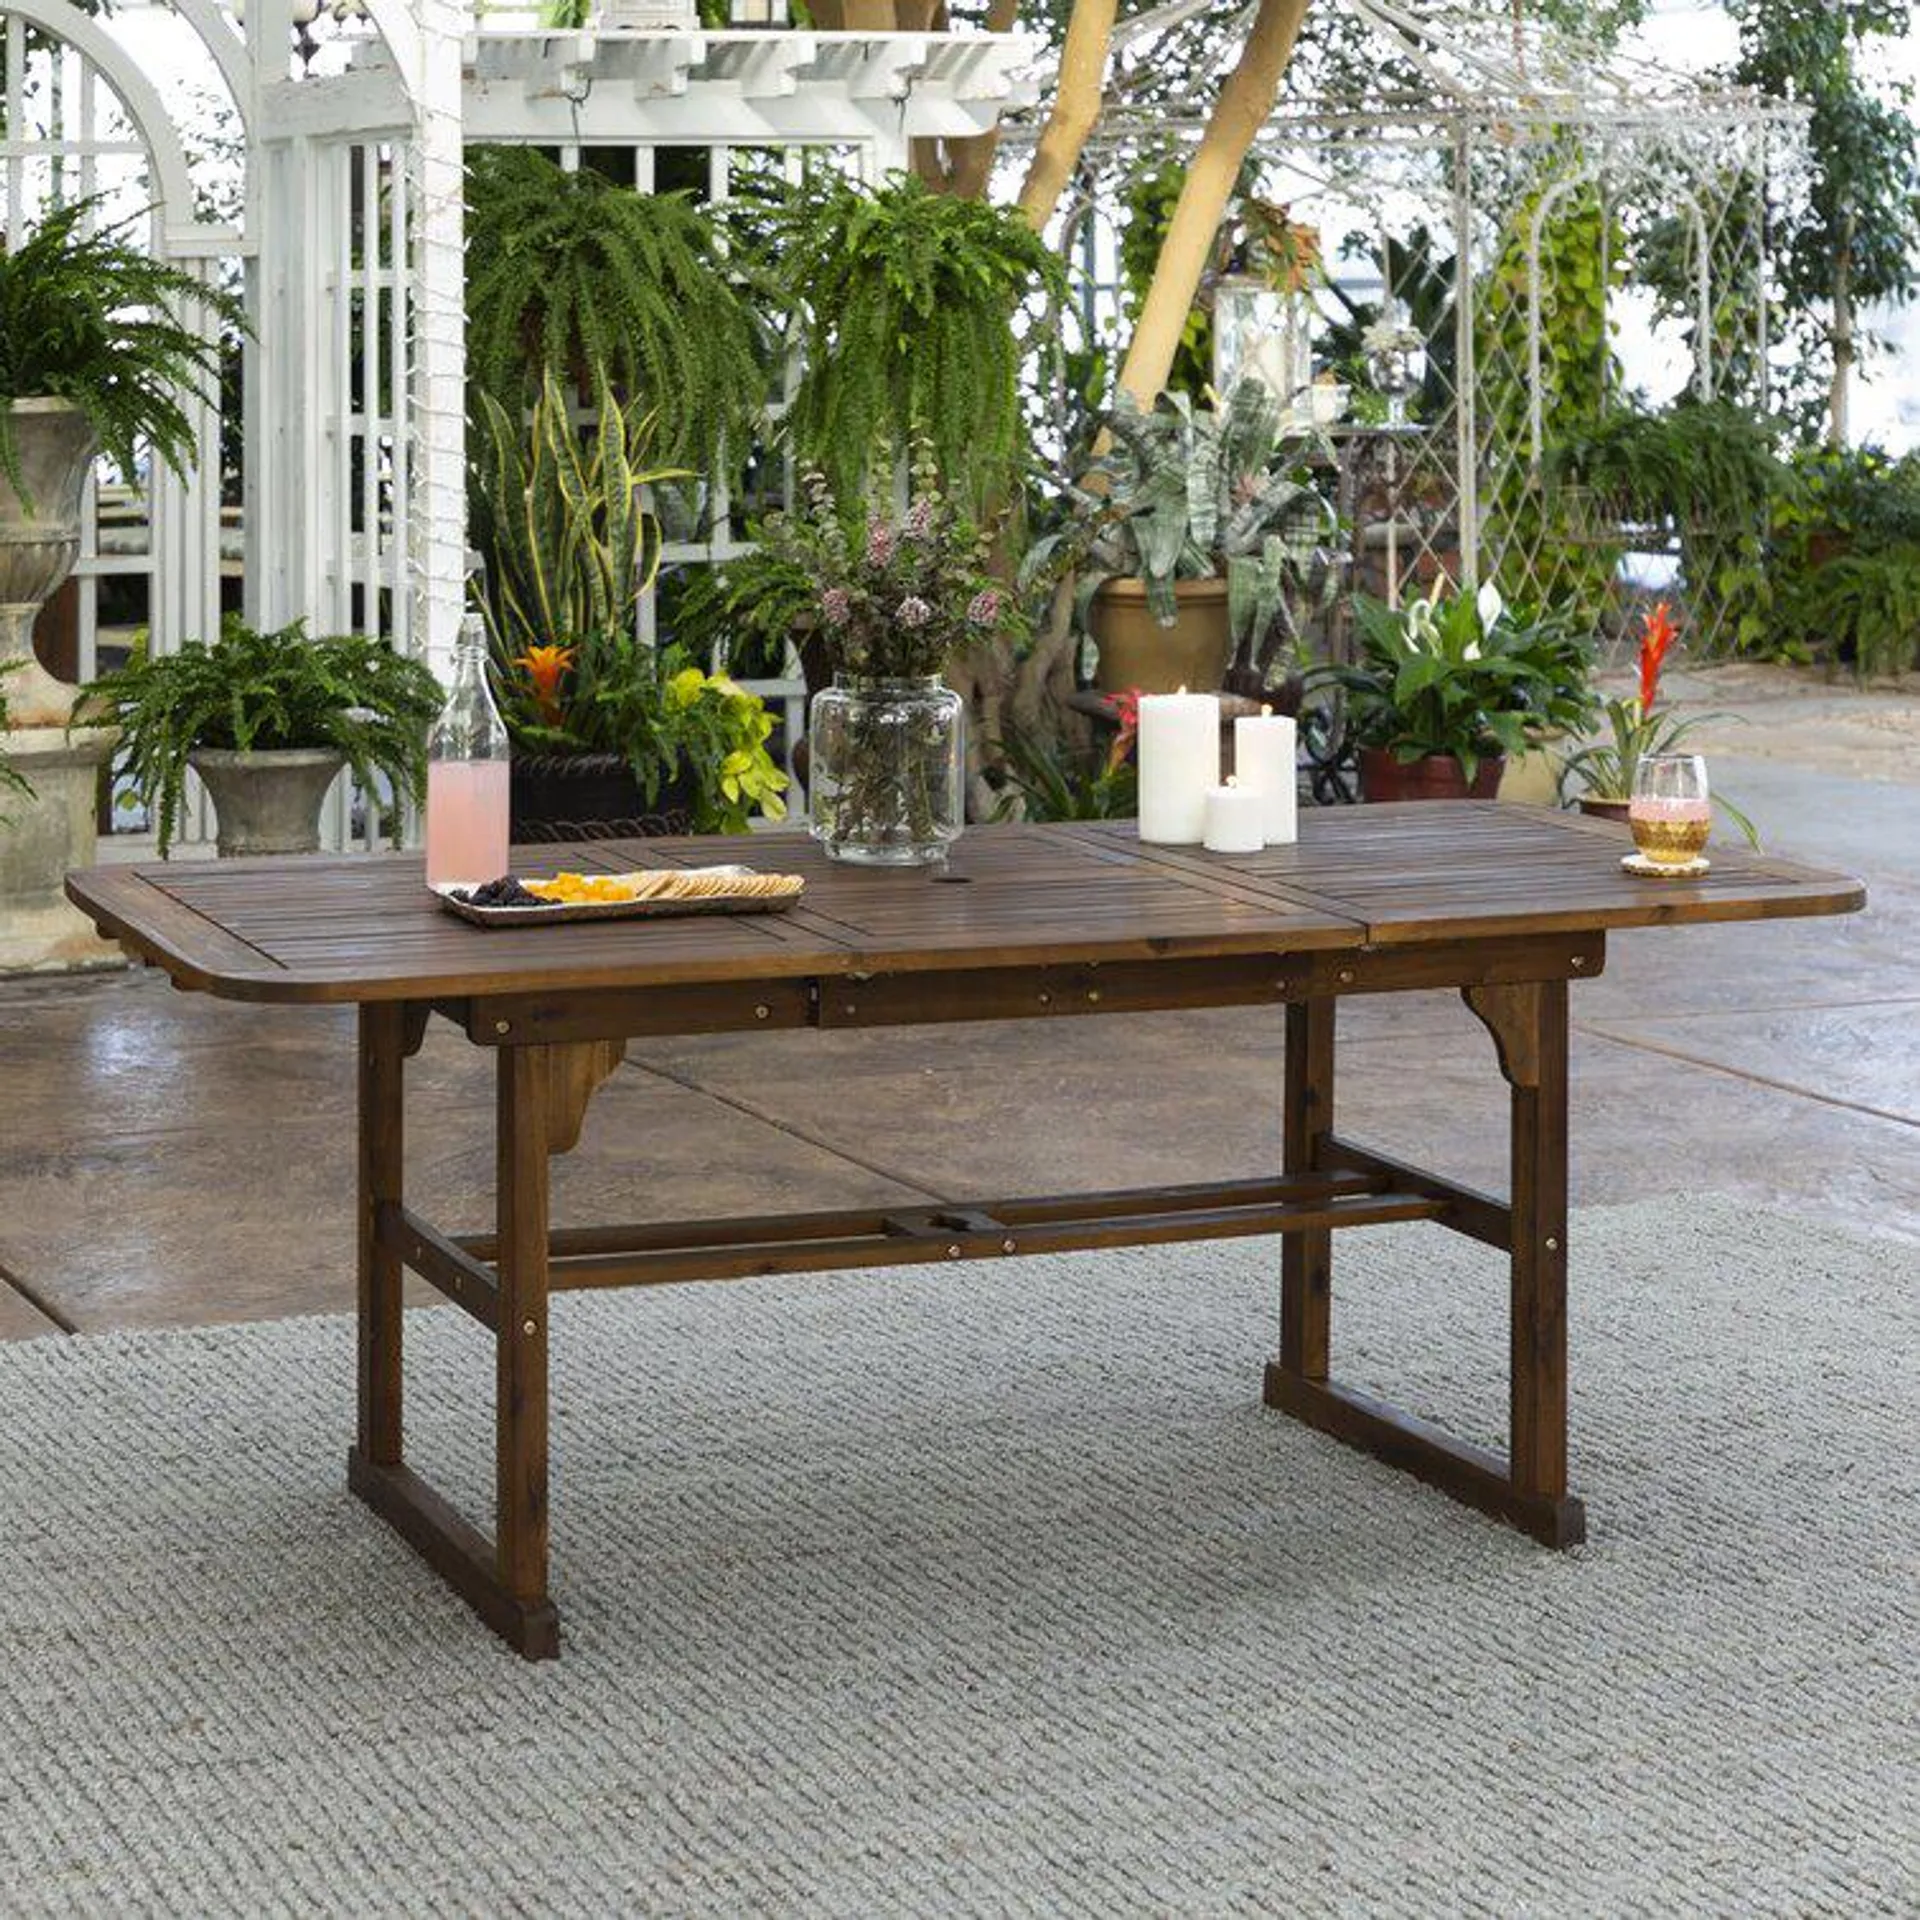 Harbison Extendable Outdoor Dining Table